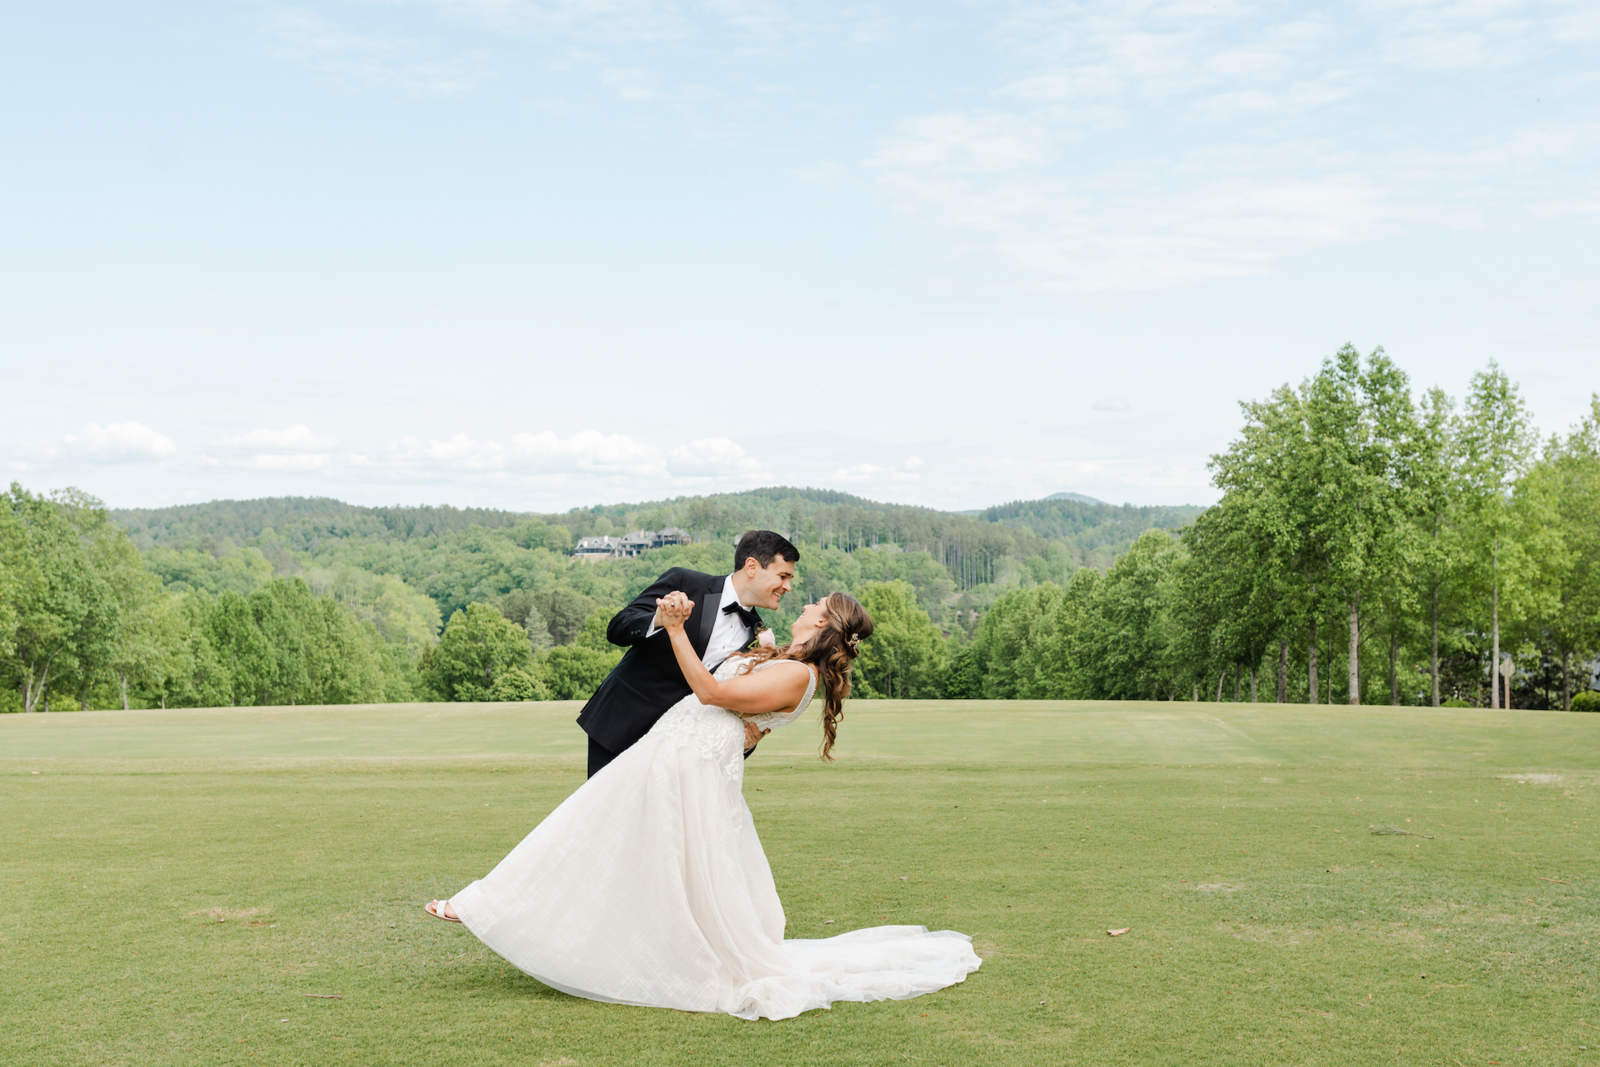 Groom dipping his bride with mountain scape in the background